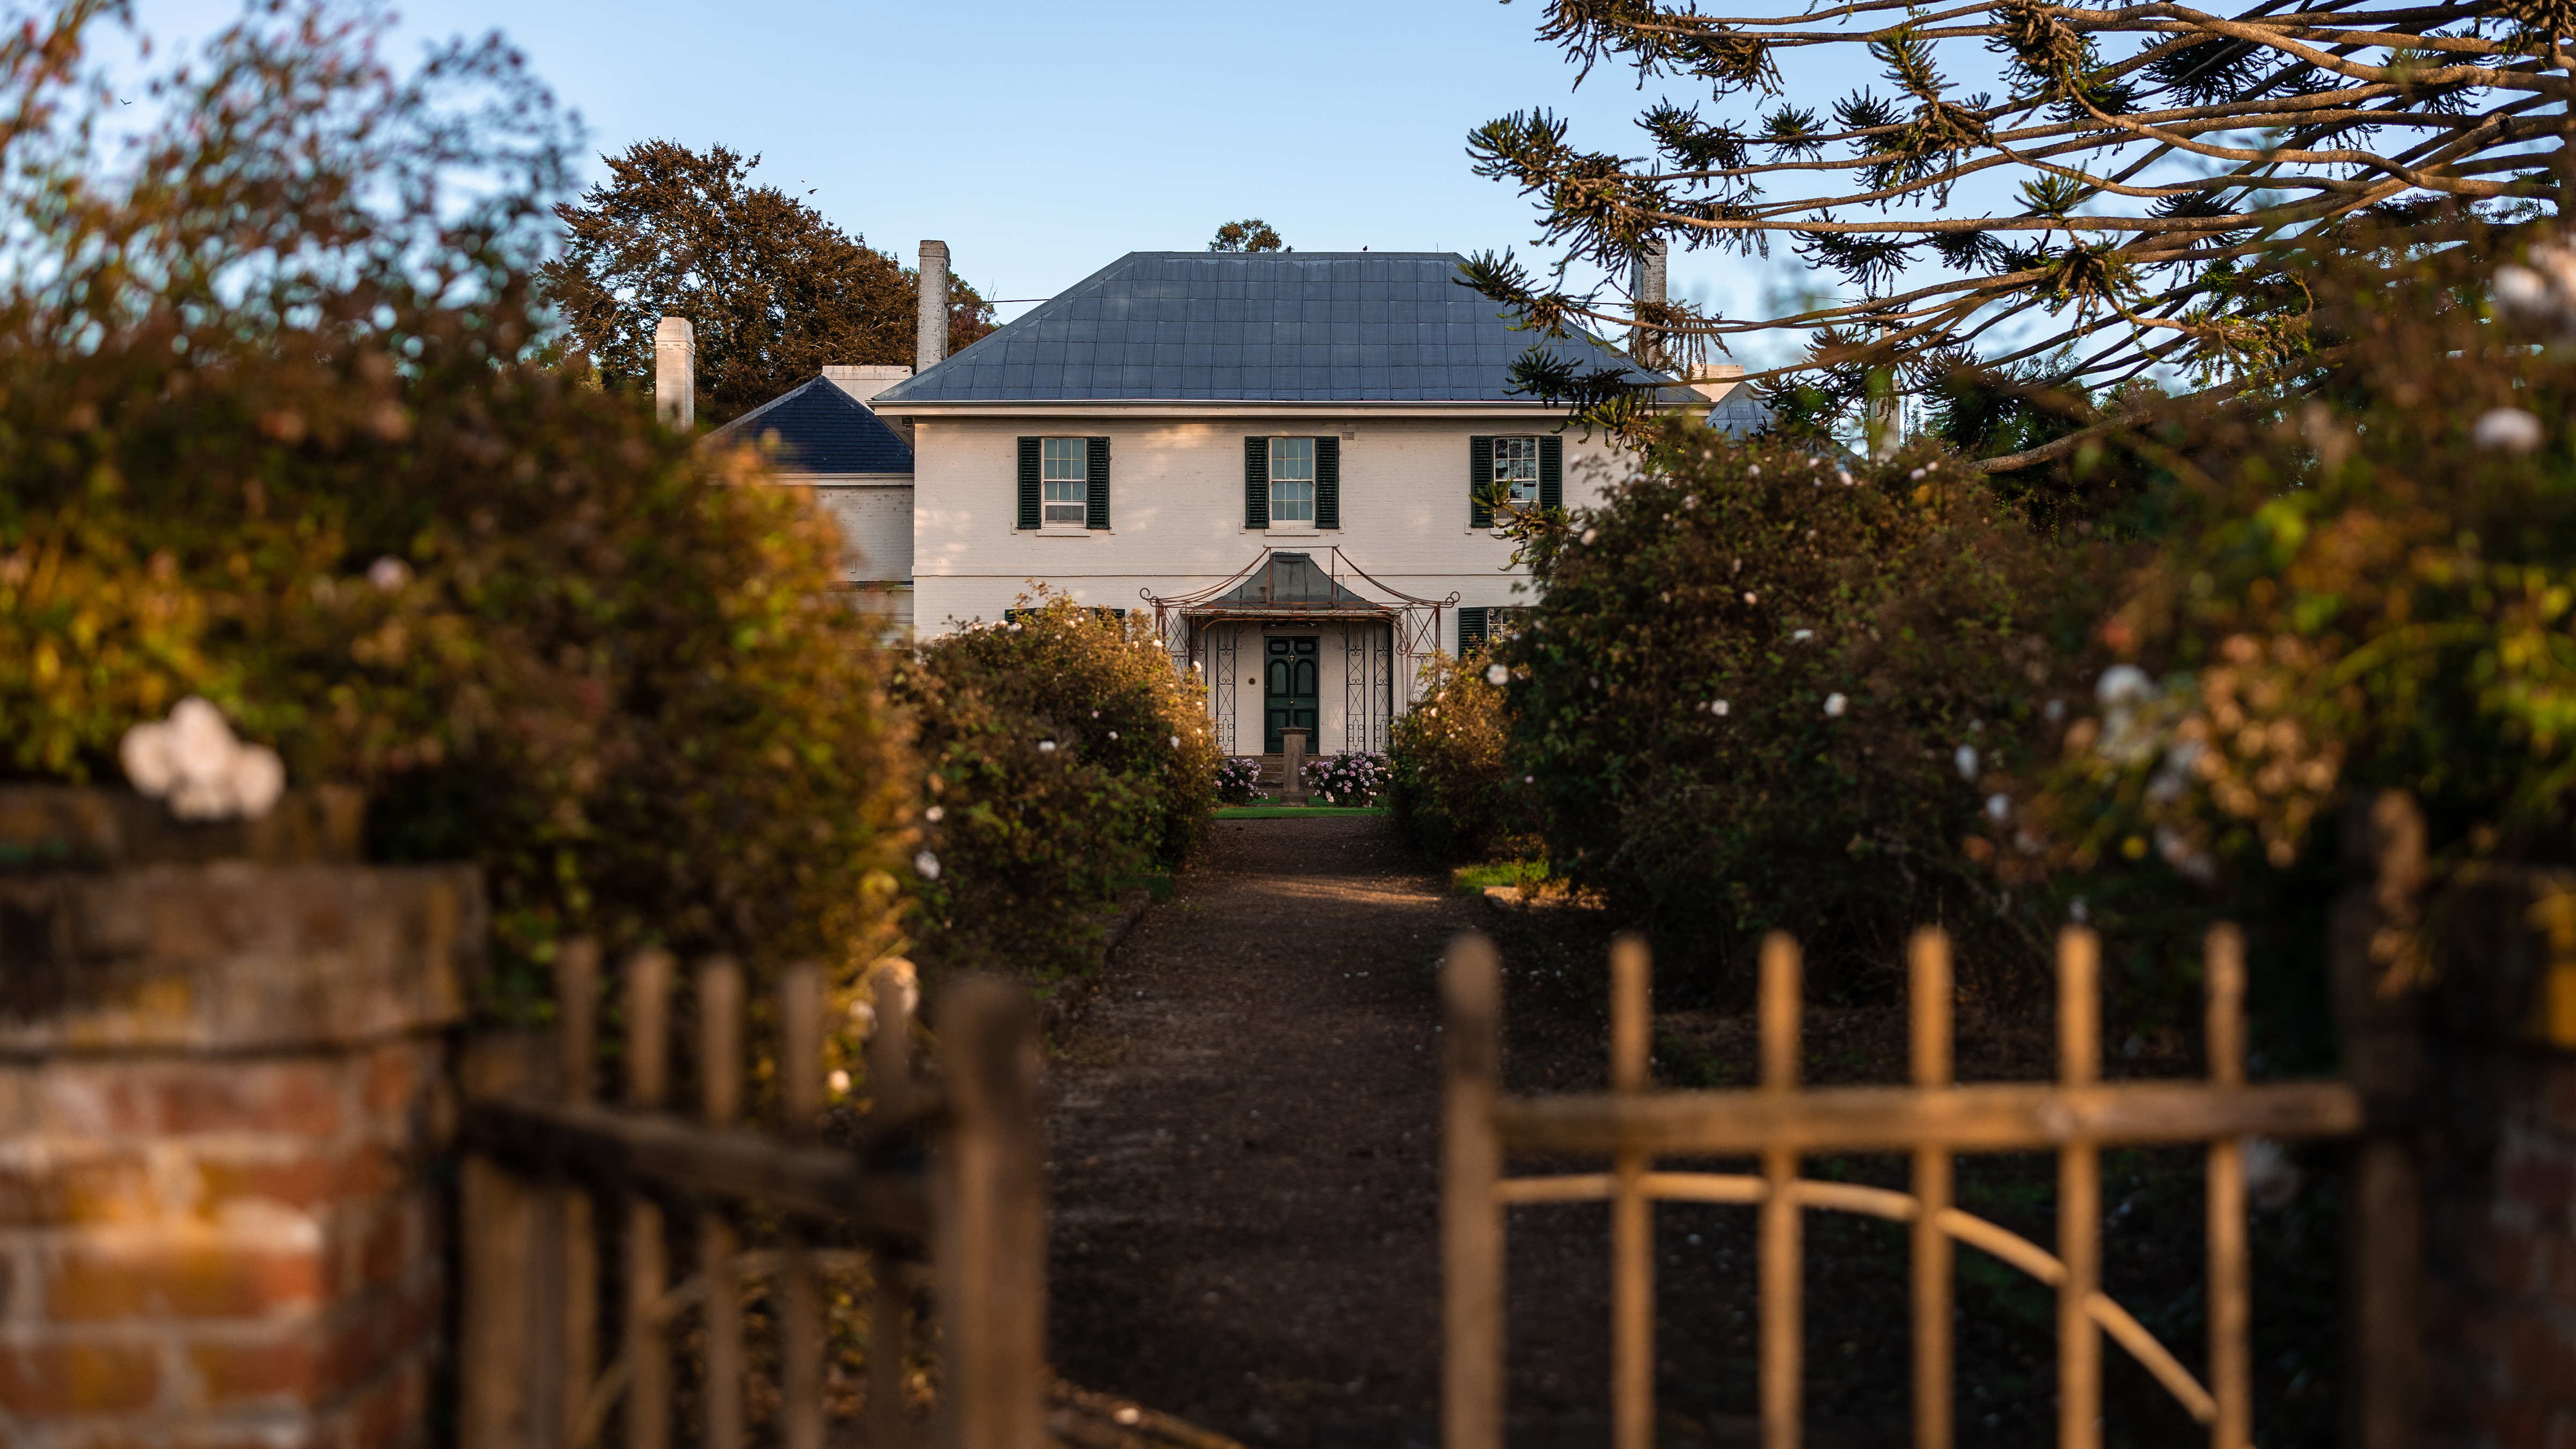 Looking through the timber gates at the end of the rose walk, the Georgian homestead features the ornate portico at the front door with three windows on the second story and zinc coated tin roof. A large Bunya pine (Araucaria bidwillii) stands to the right of the image. Photo: Kate von Stieglitz / Tourism Australia.